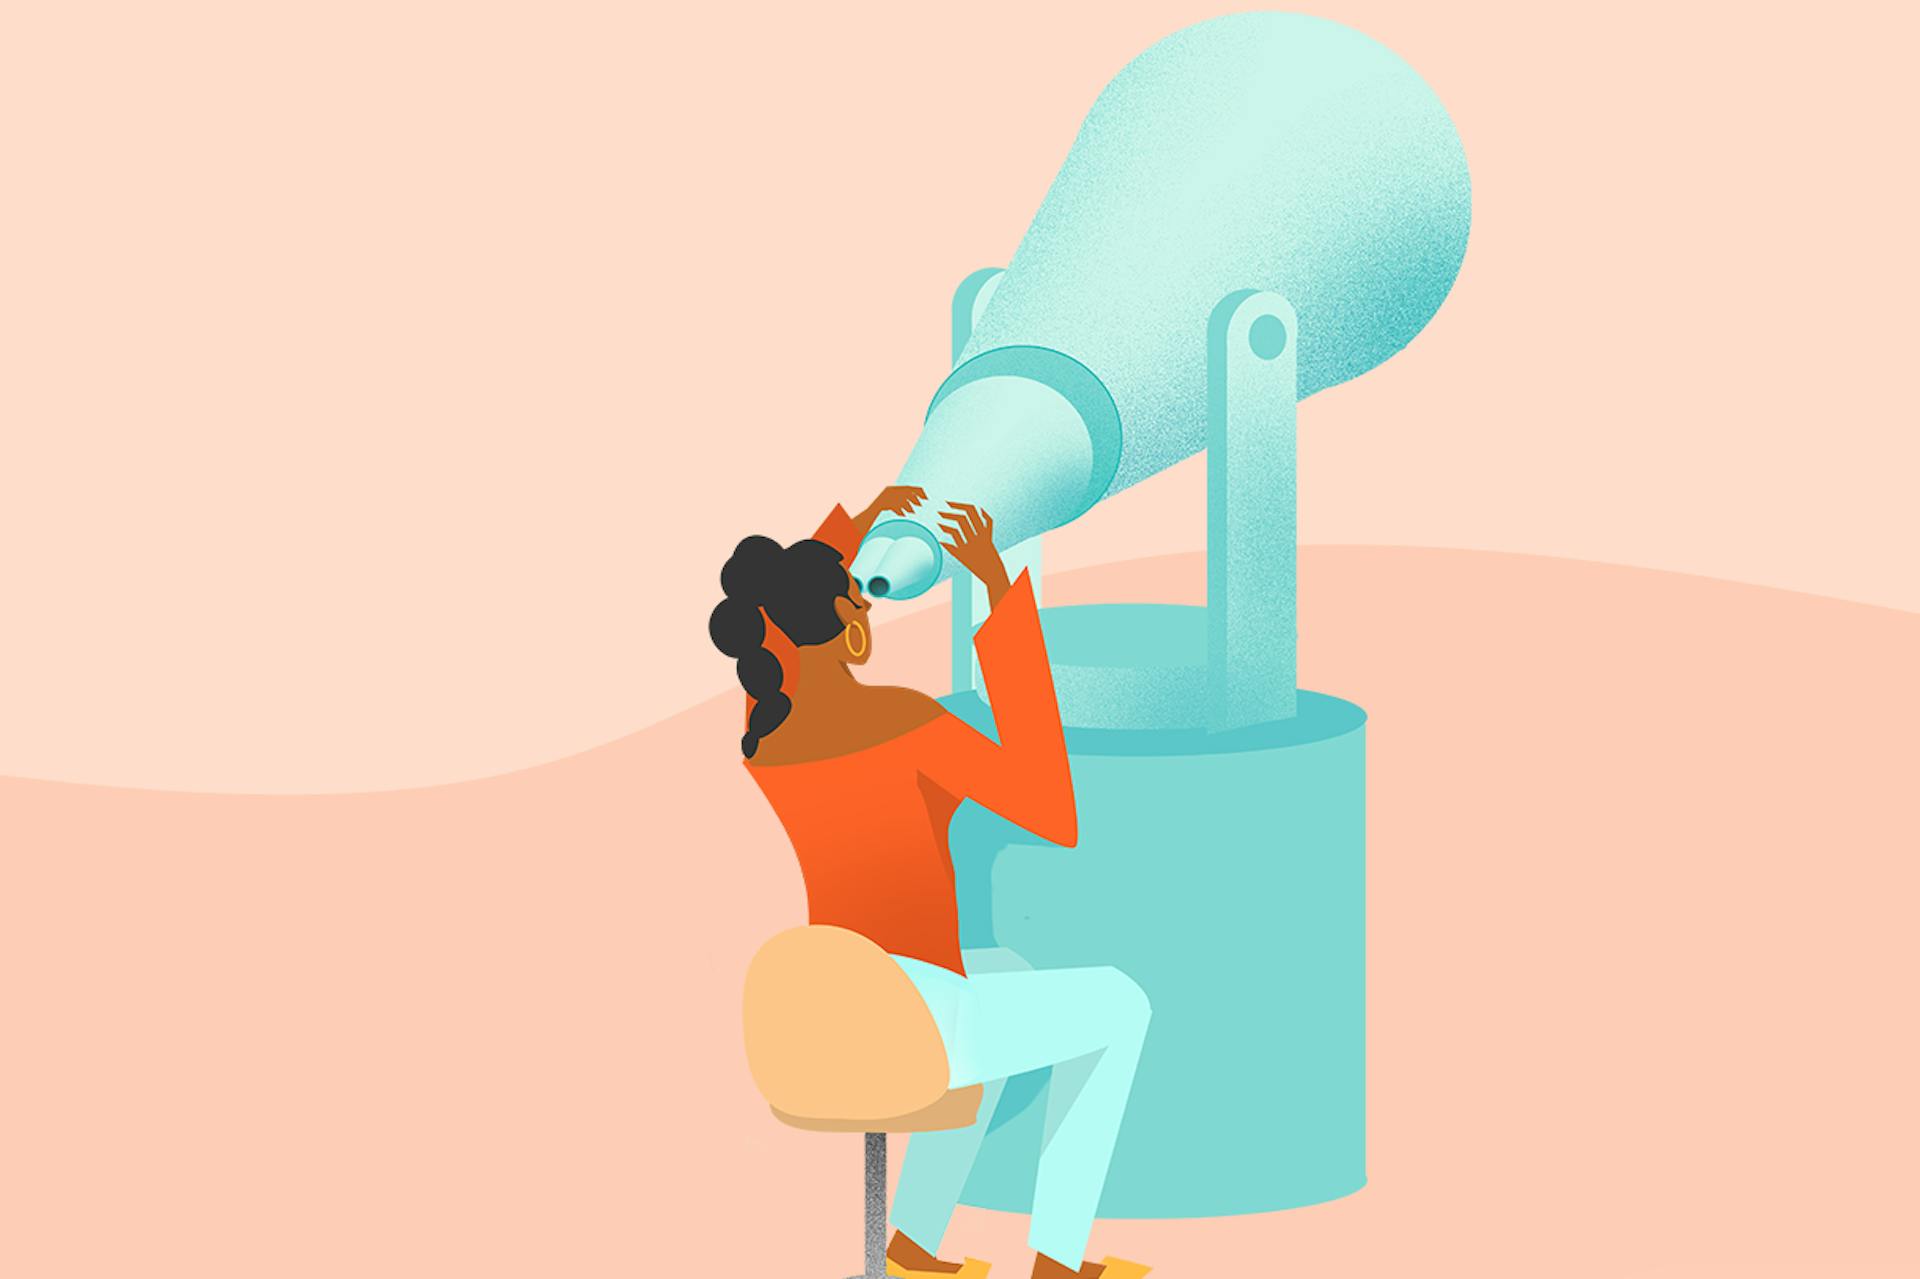 Looking for an alternative social media management solution? This image of a woman staring into a giant telescope represents how monumental that search can feel. In this blog, we explore alternative social media solutions to Planoly.